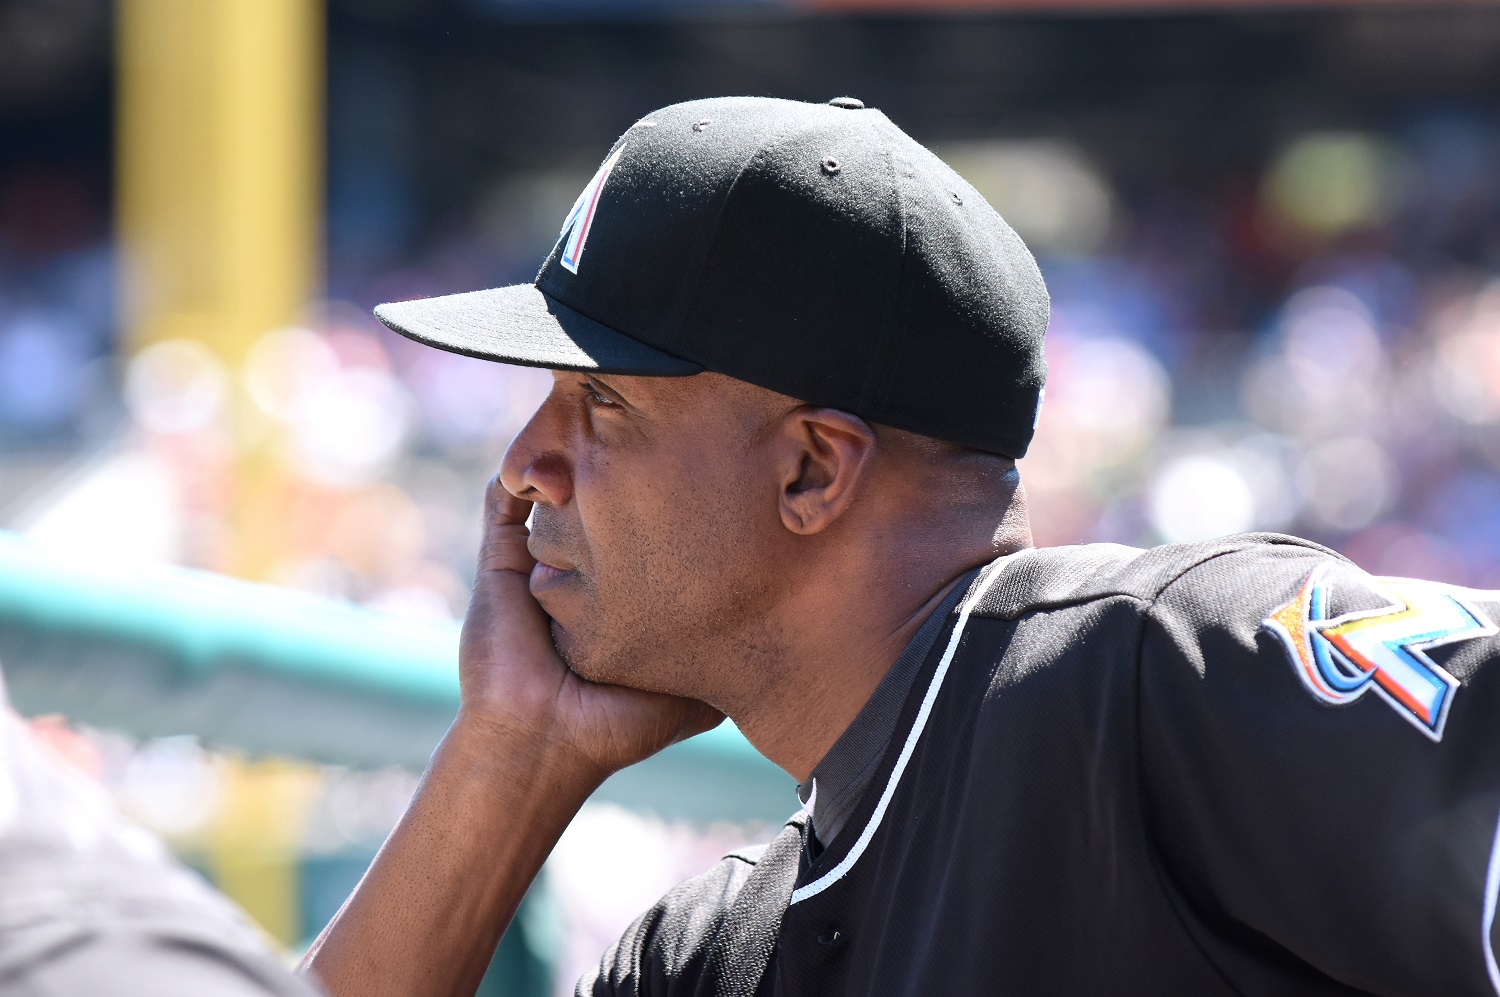 The Miami Marlins paid Barry Bonds $1.5 million for a failed season of work as their batting coach in 2016.